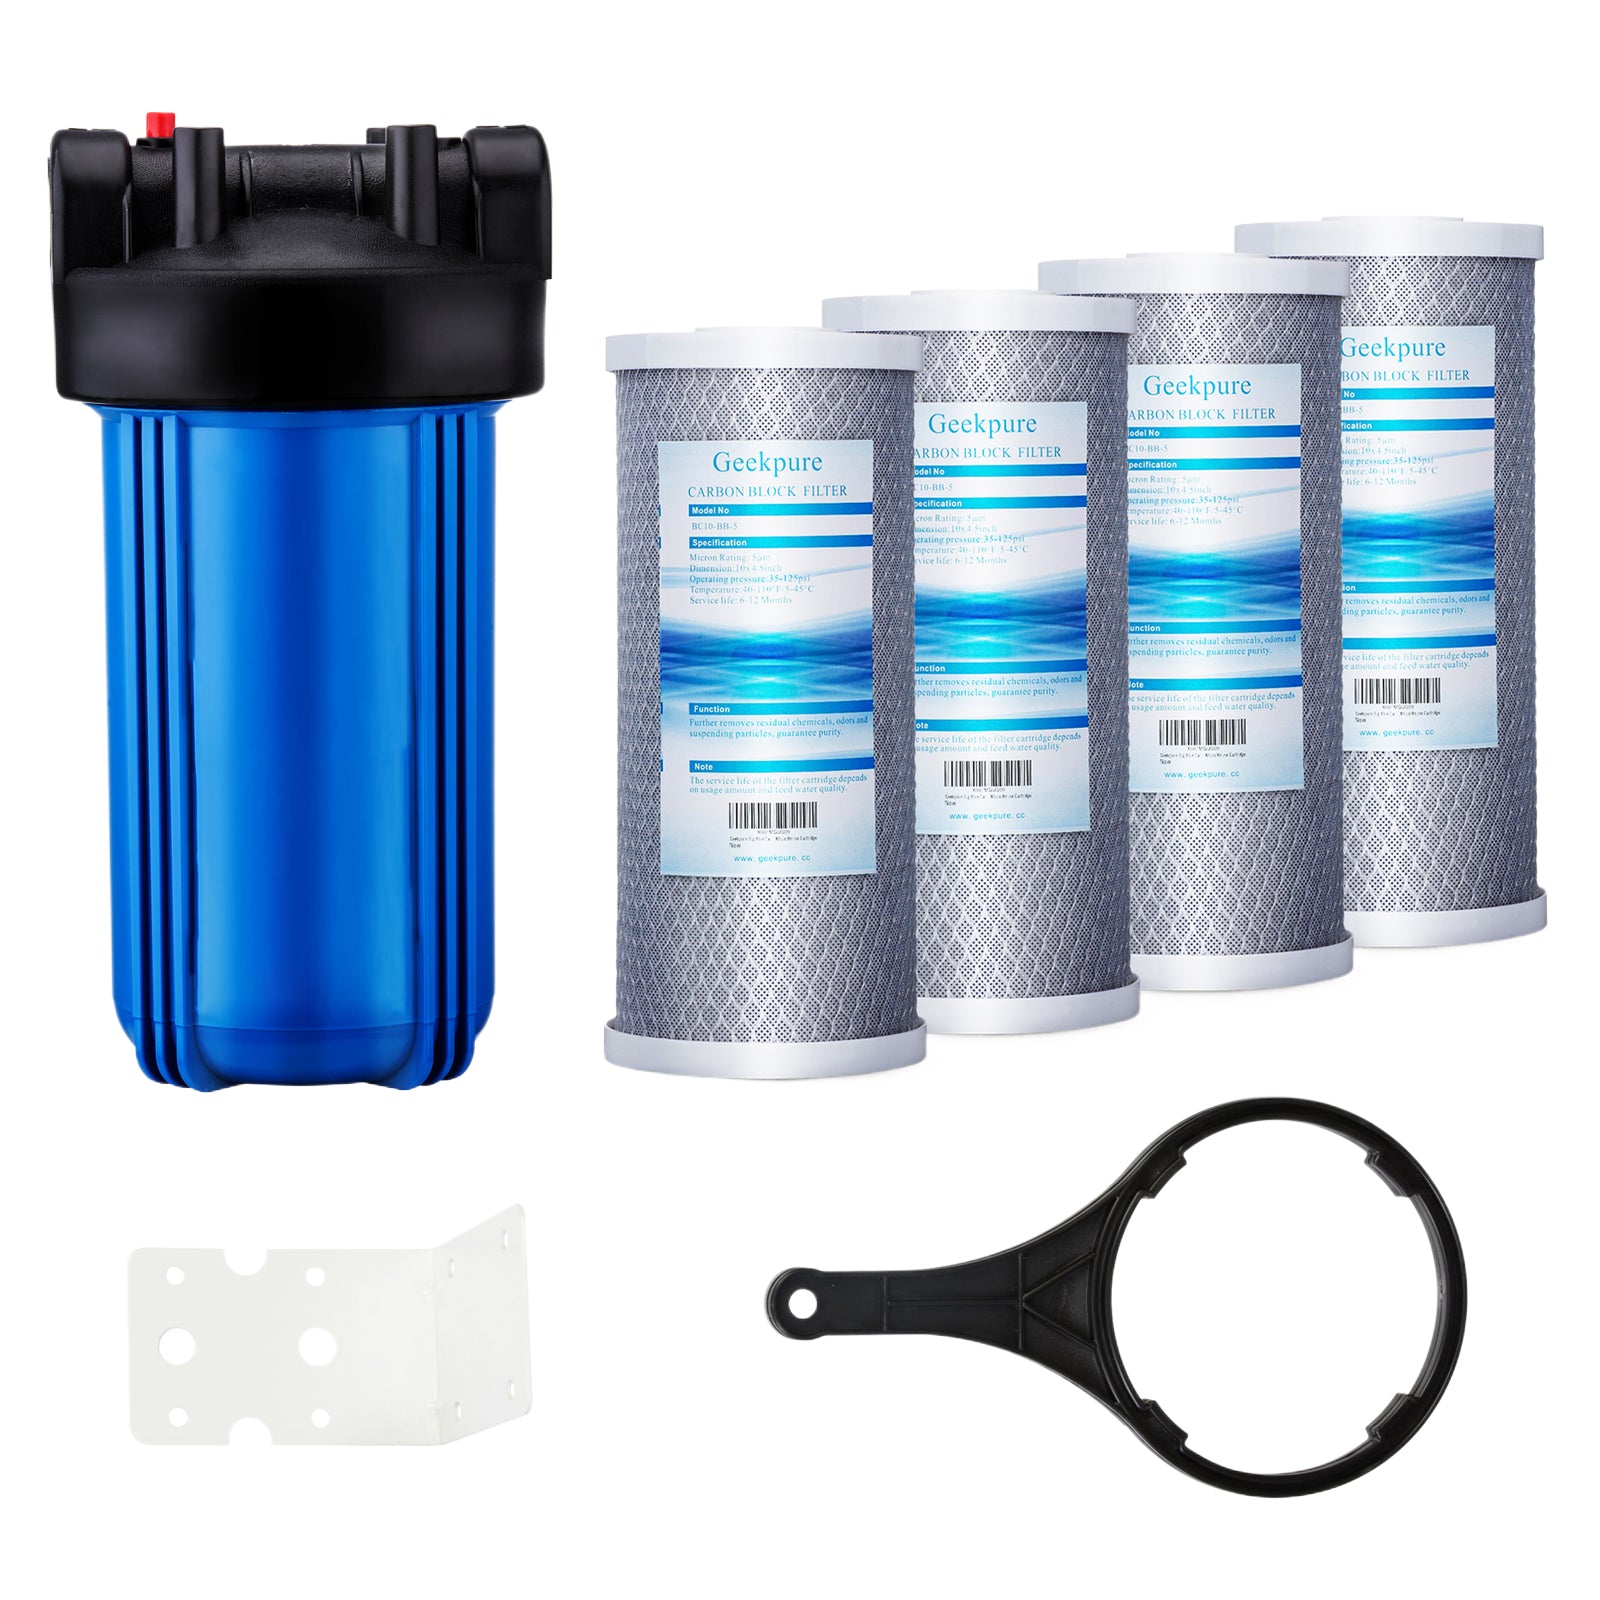 Mainline Hard Water Filter for whole house (10 inch)